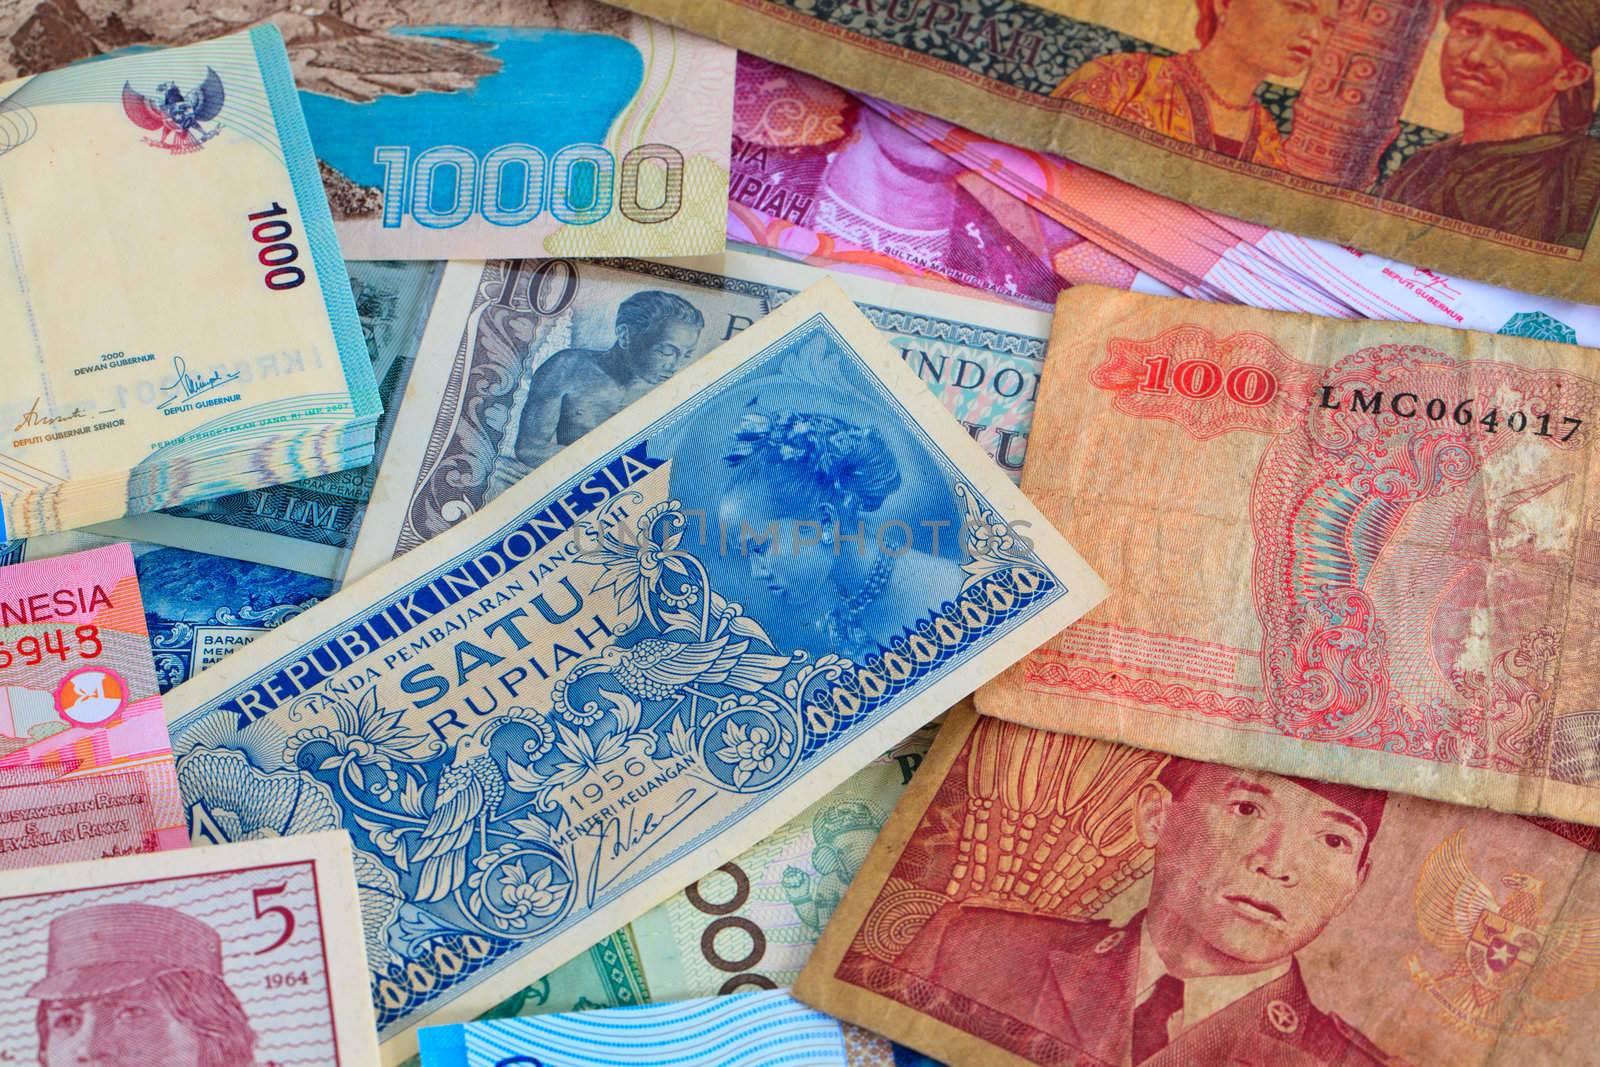 Indonesian Currency, colorful bank notes, some very old from the 1950's